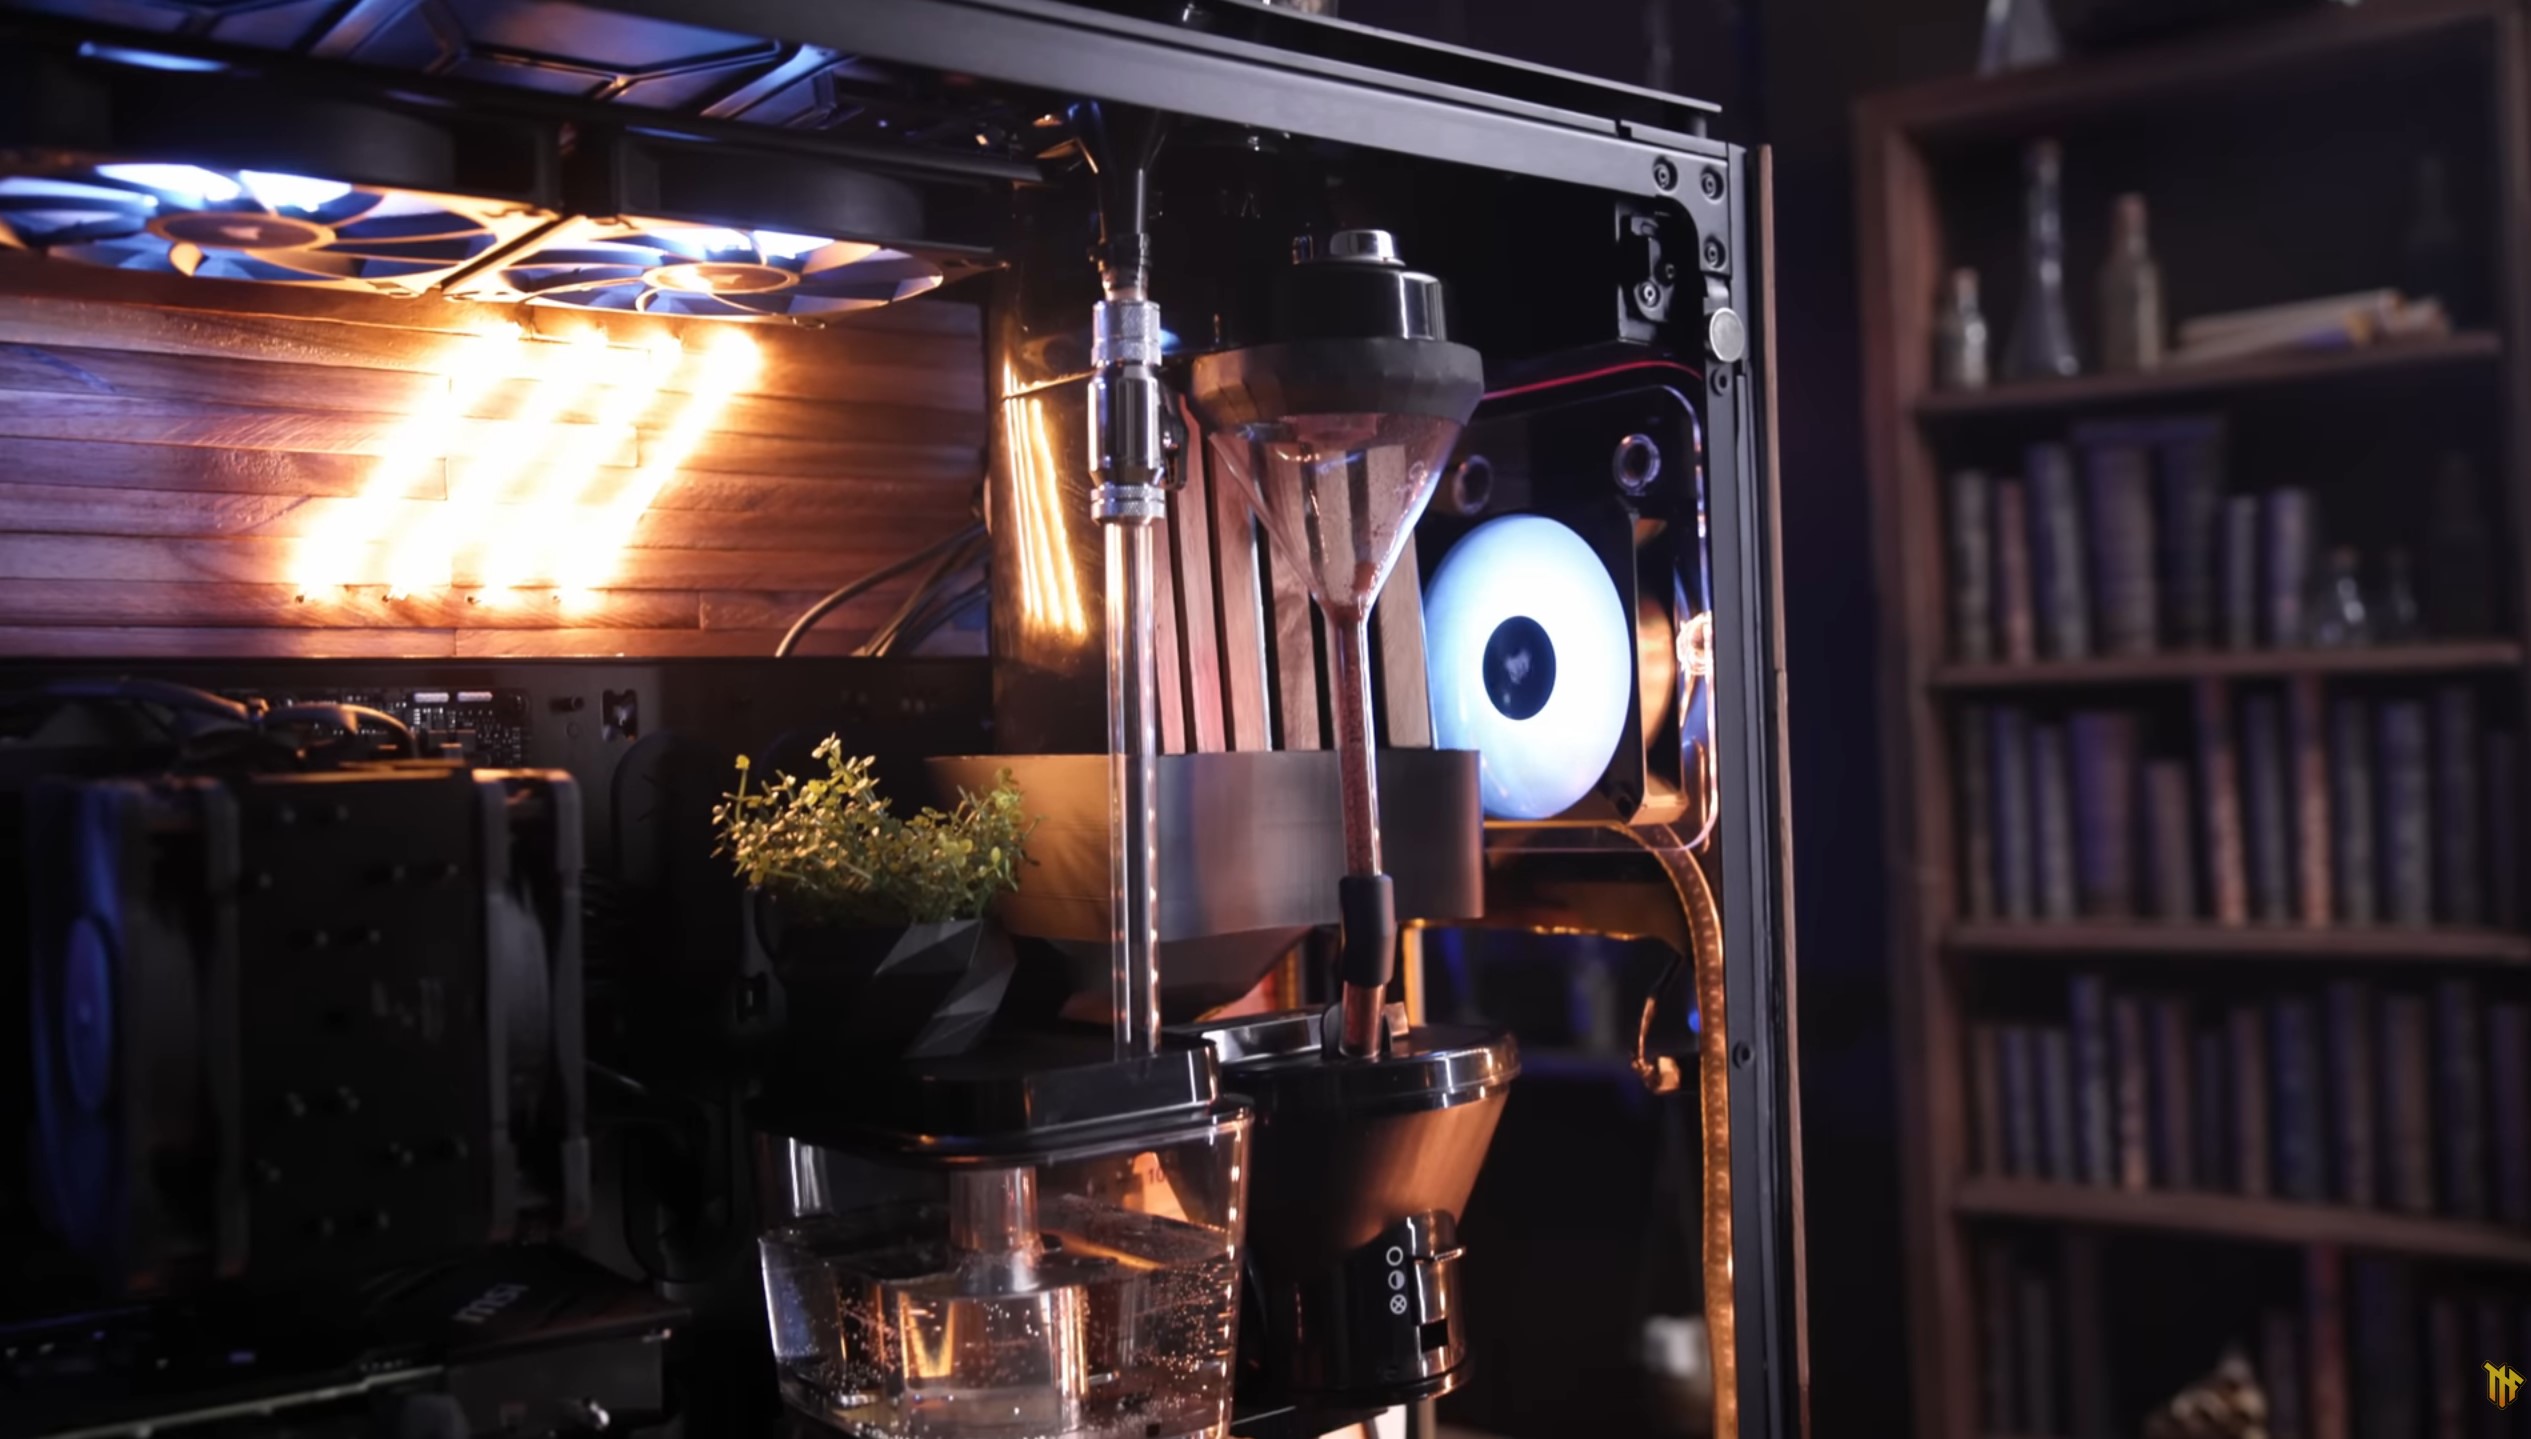 The inside of a custom-built gaming PC.